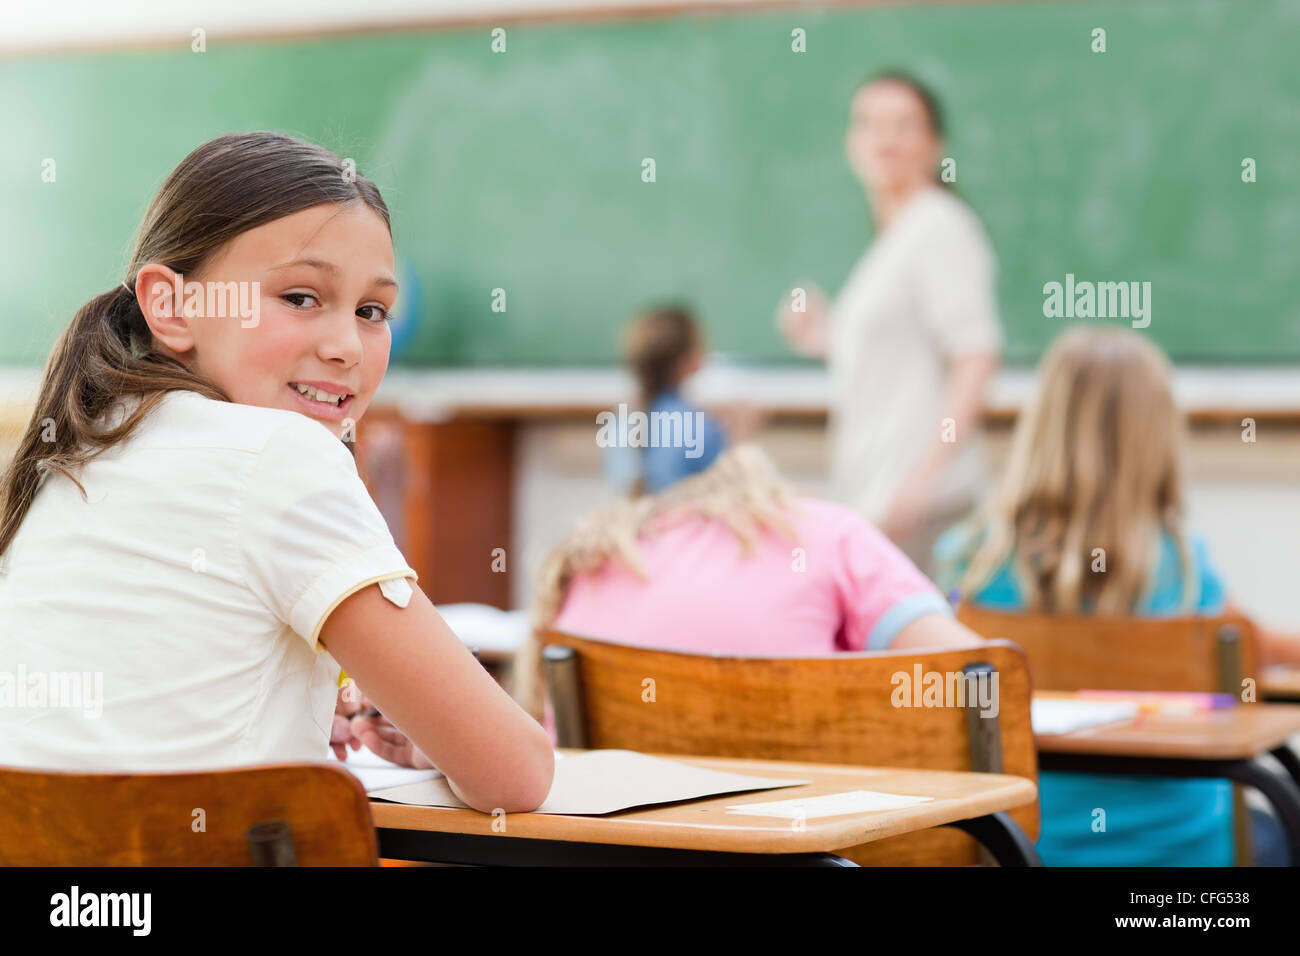 Student turned around in class Stock Photo